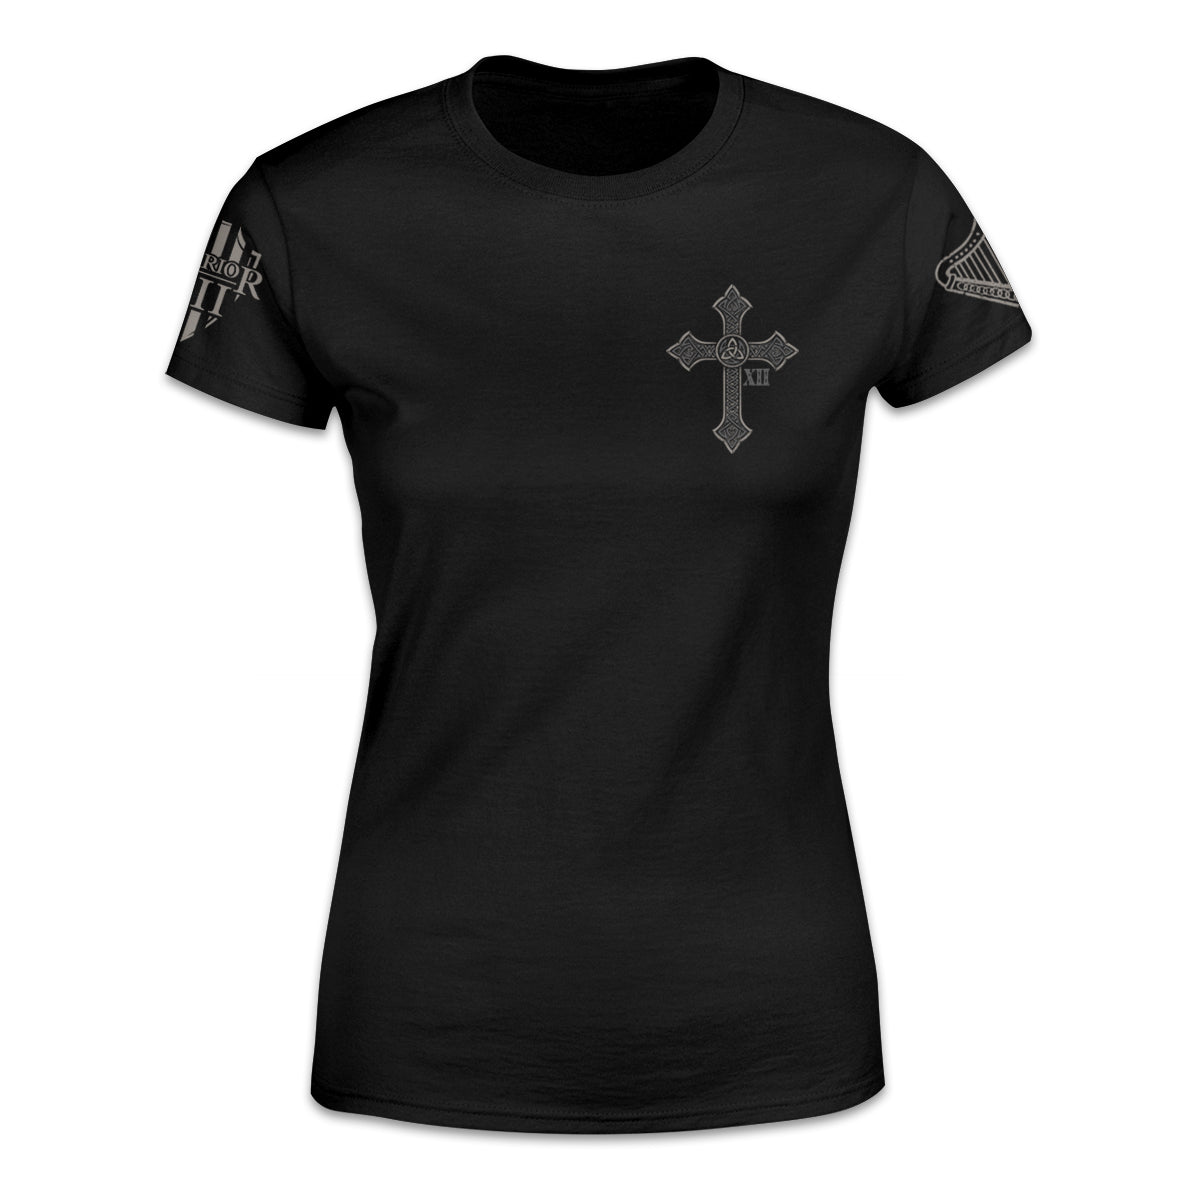 A black women's relaxed fit shirt with an Irish cross printed on the front of the shirt.